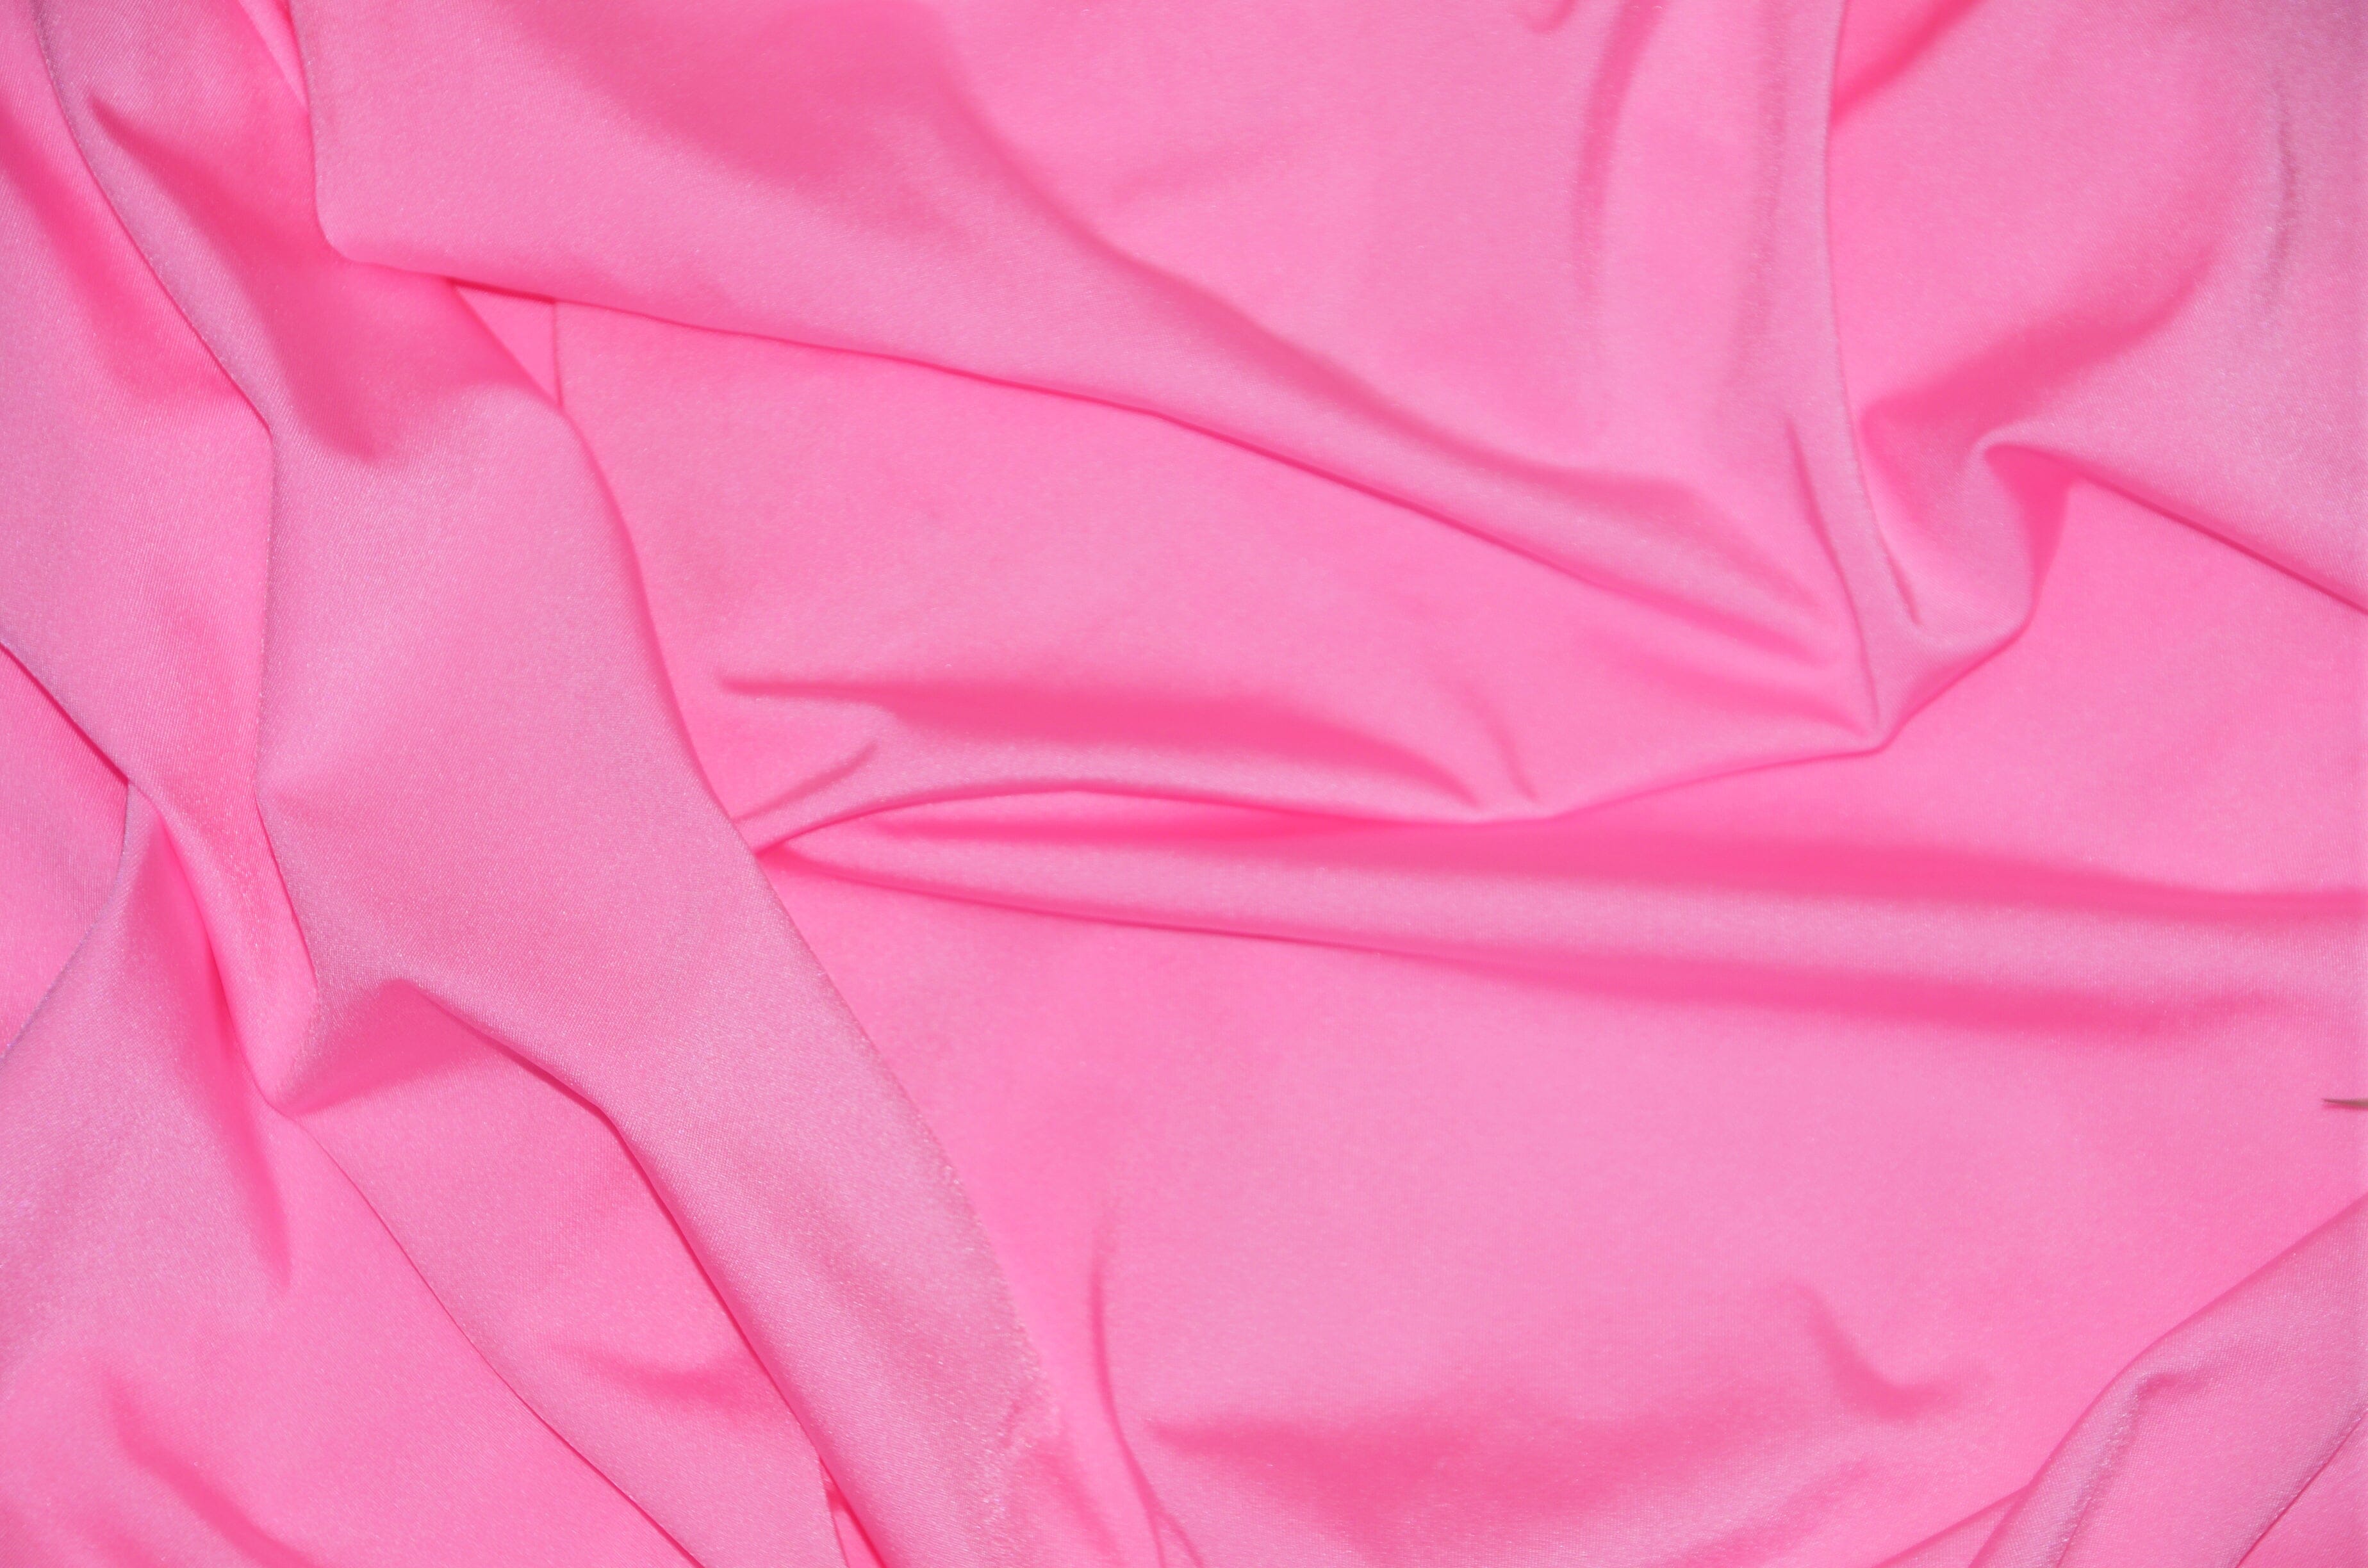 Nylon Spandex 4 Way Stretch Fabric | 60" Width | Great for Swimwear, Dancewear, Waterproof, Tablecloths, Chair Covers | Multiple Colors | Fabric mytextilefabric Yards Neon Pink 